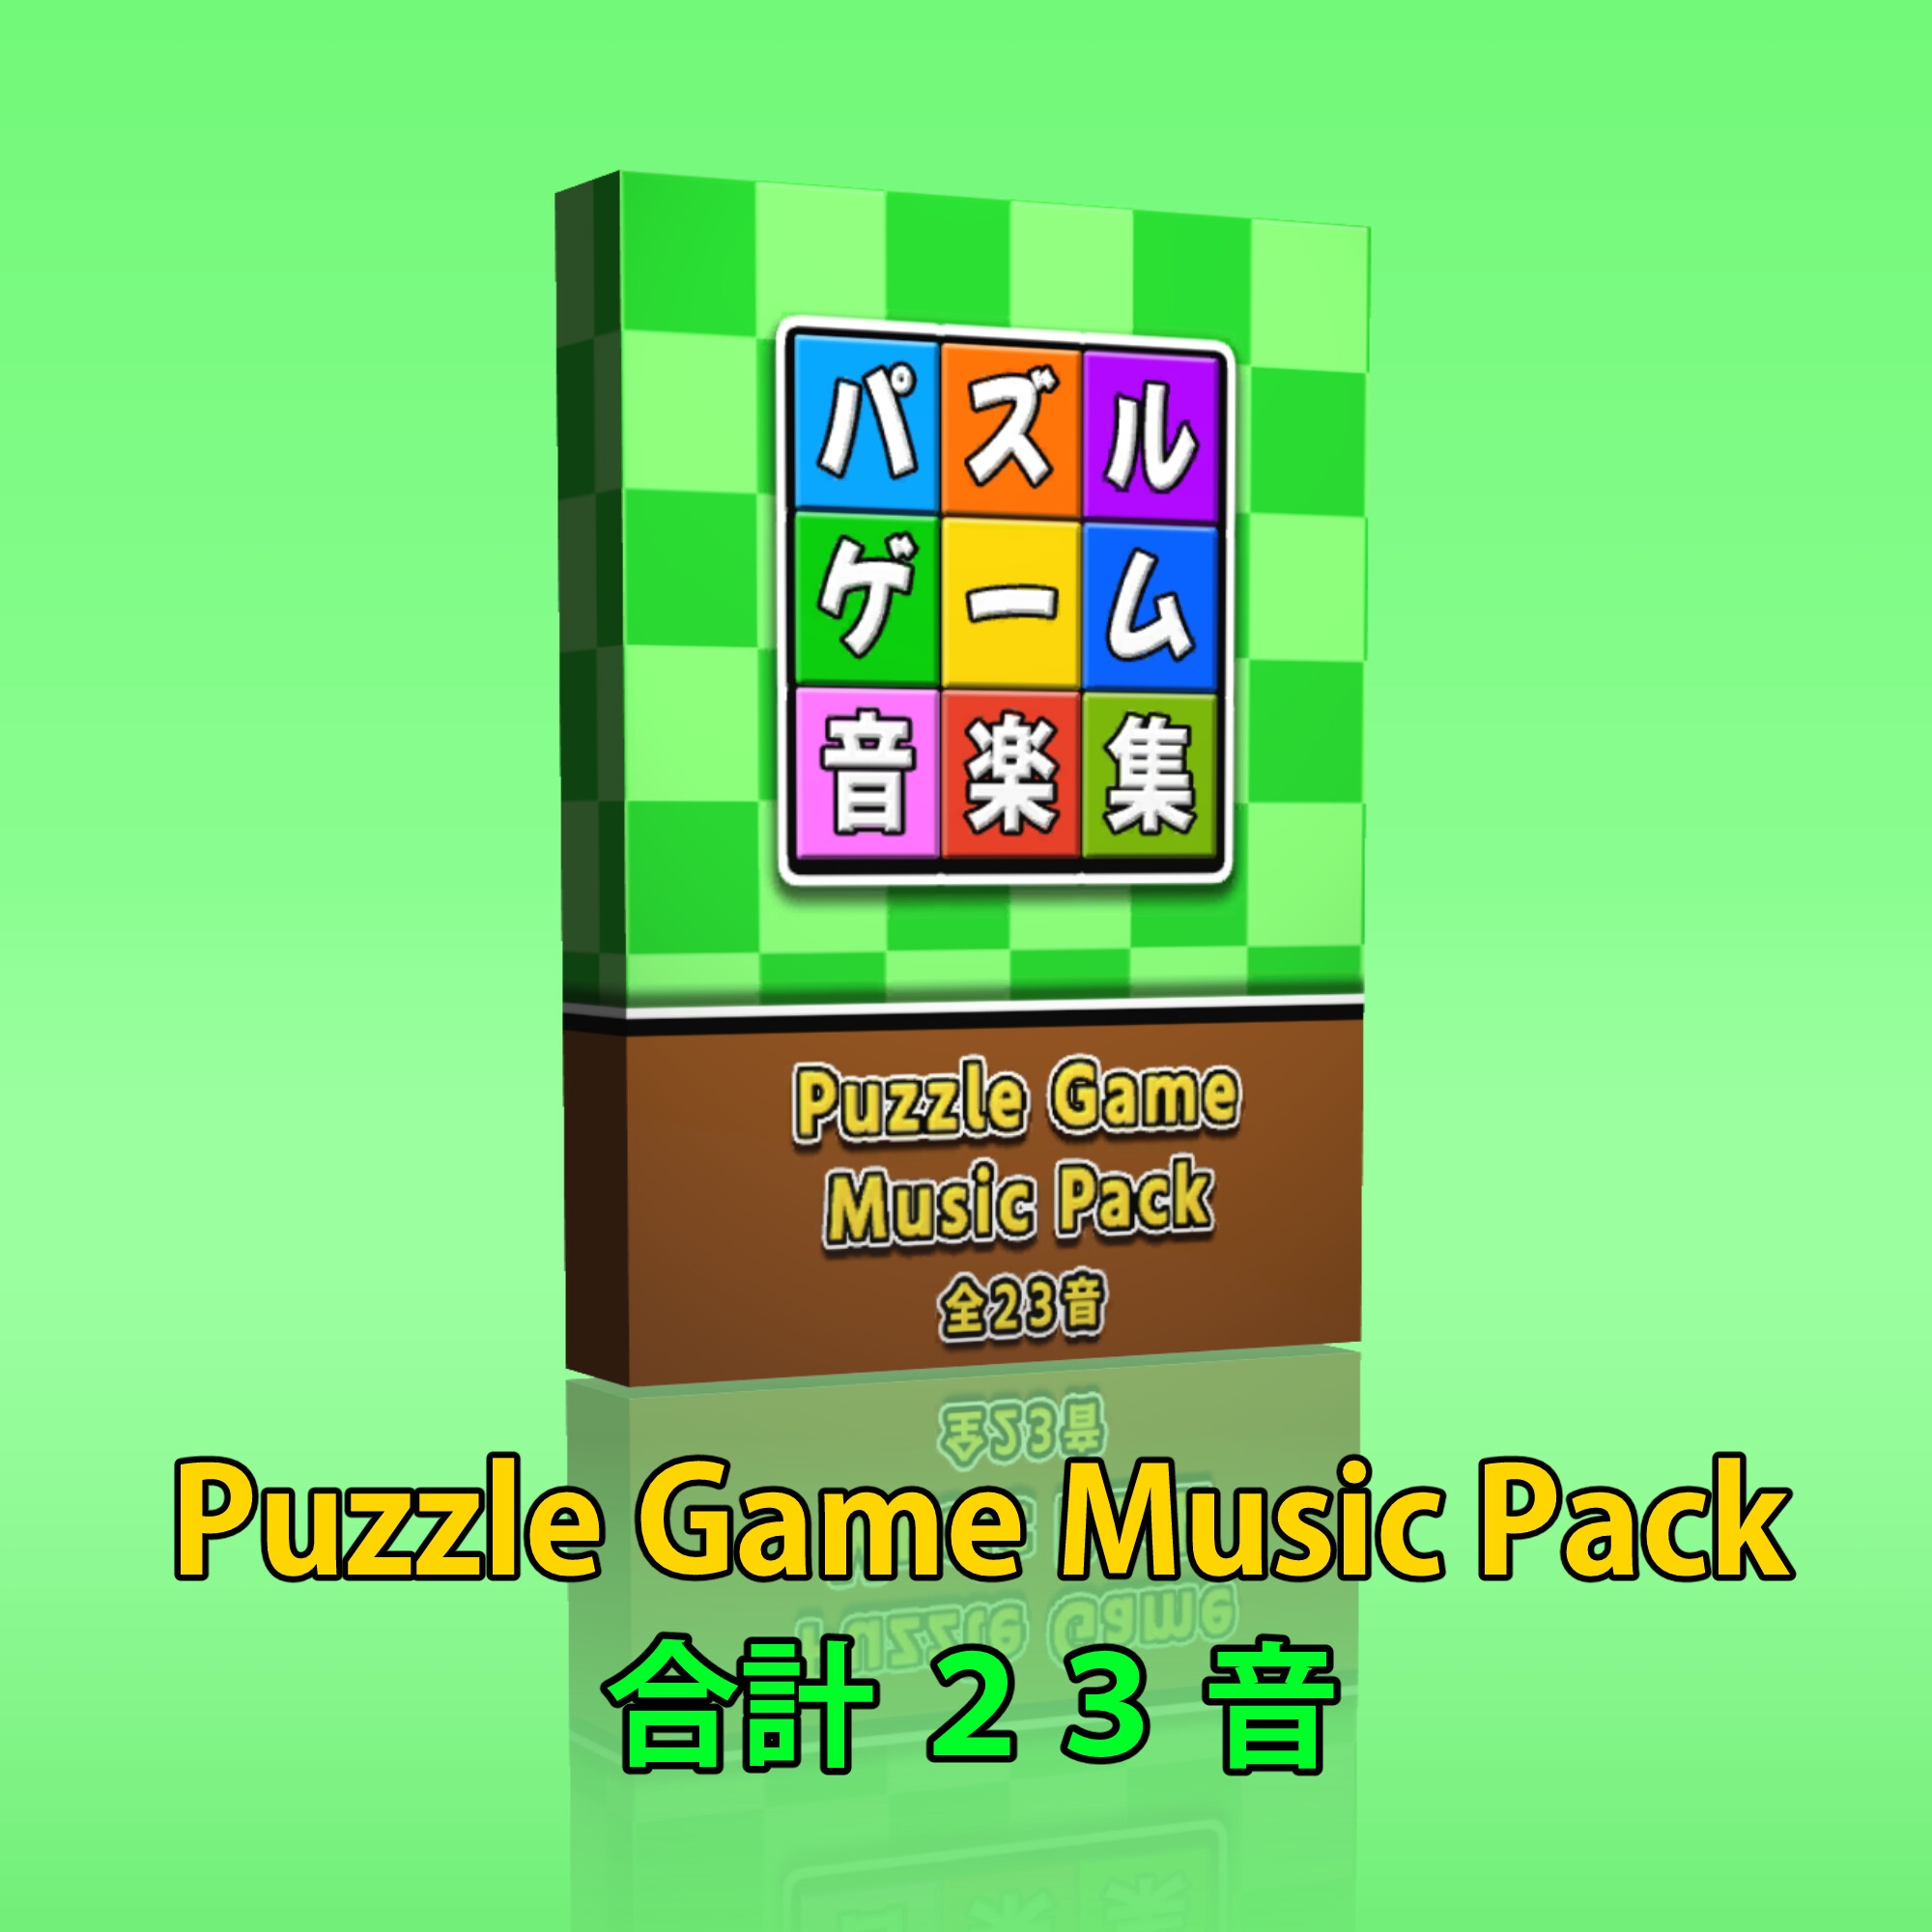 【Puzzle Game Music Pack】パズルゲームの音楽素材パック